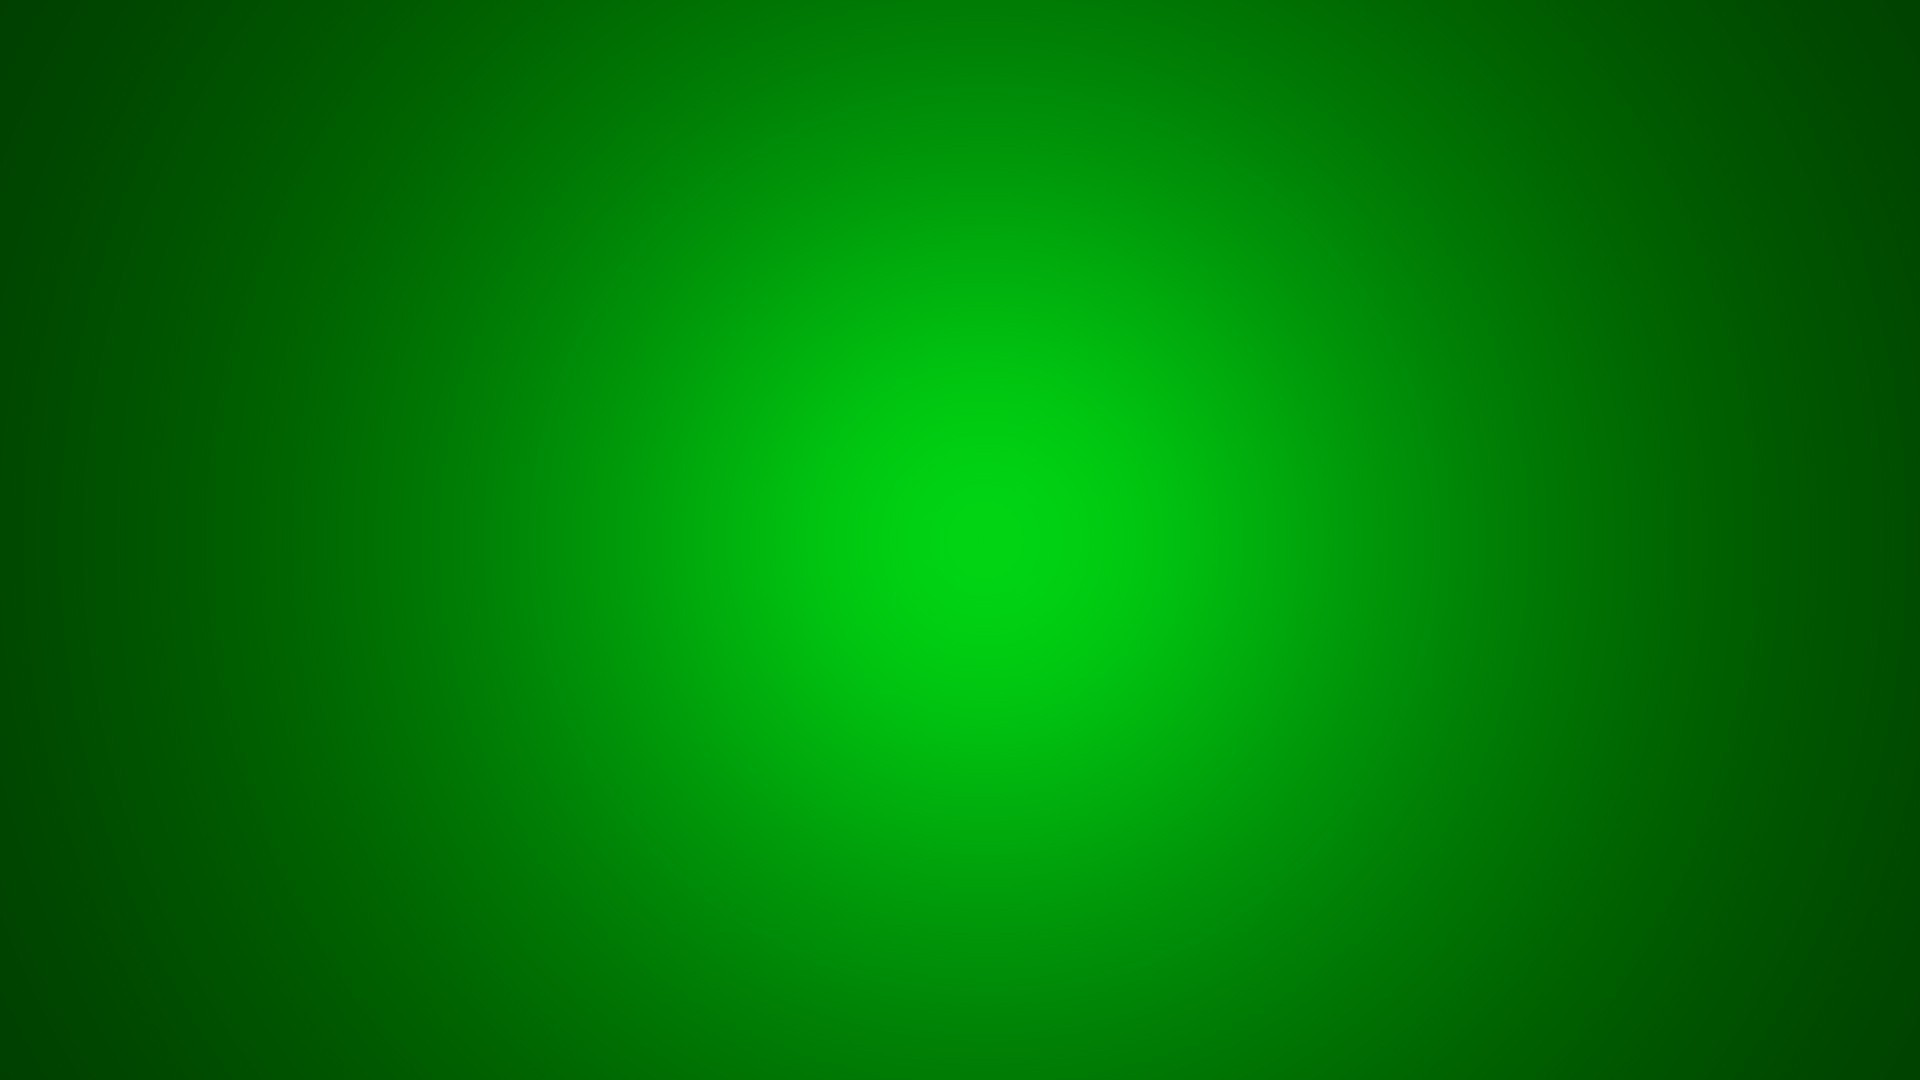 Wallpaper Neon Green HD with image resolution 1920x1080 pixel. You can make this wallpaper for your Desktop Computer Backgrounds, Mac Wallpapers, Android Lock screen or iPhone Screensavers